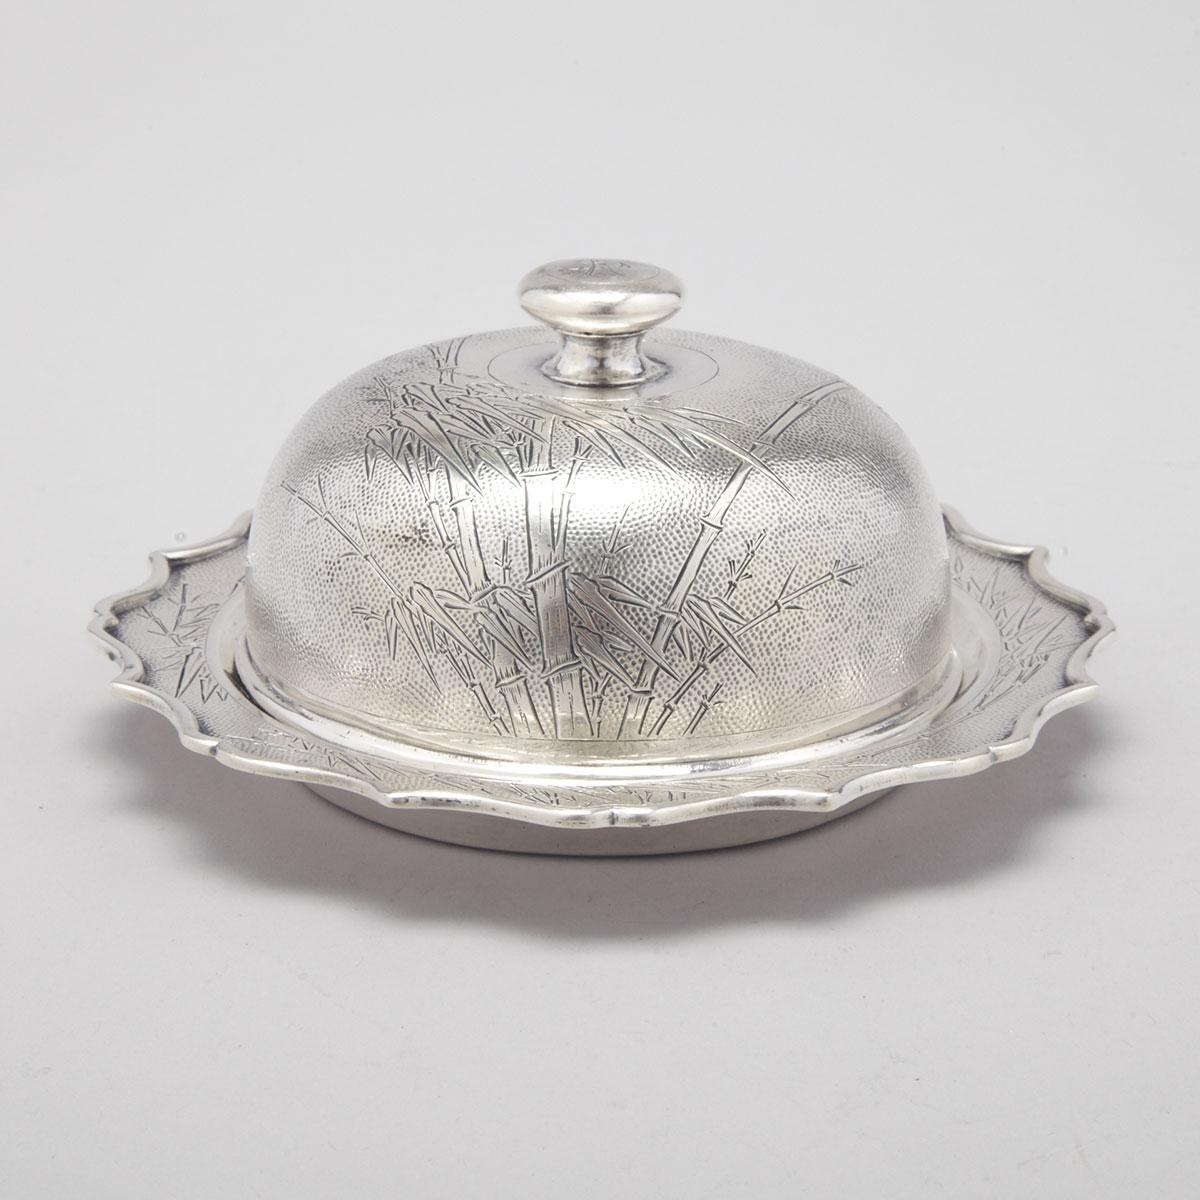 Chinese Silver Covered Butter Dish, early 20th century